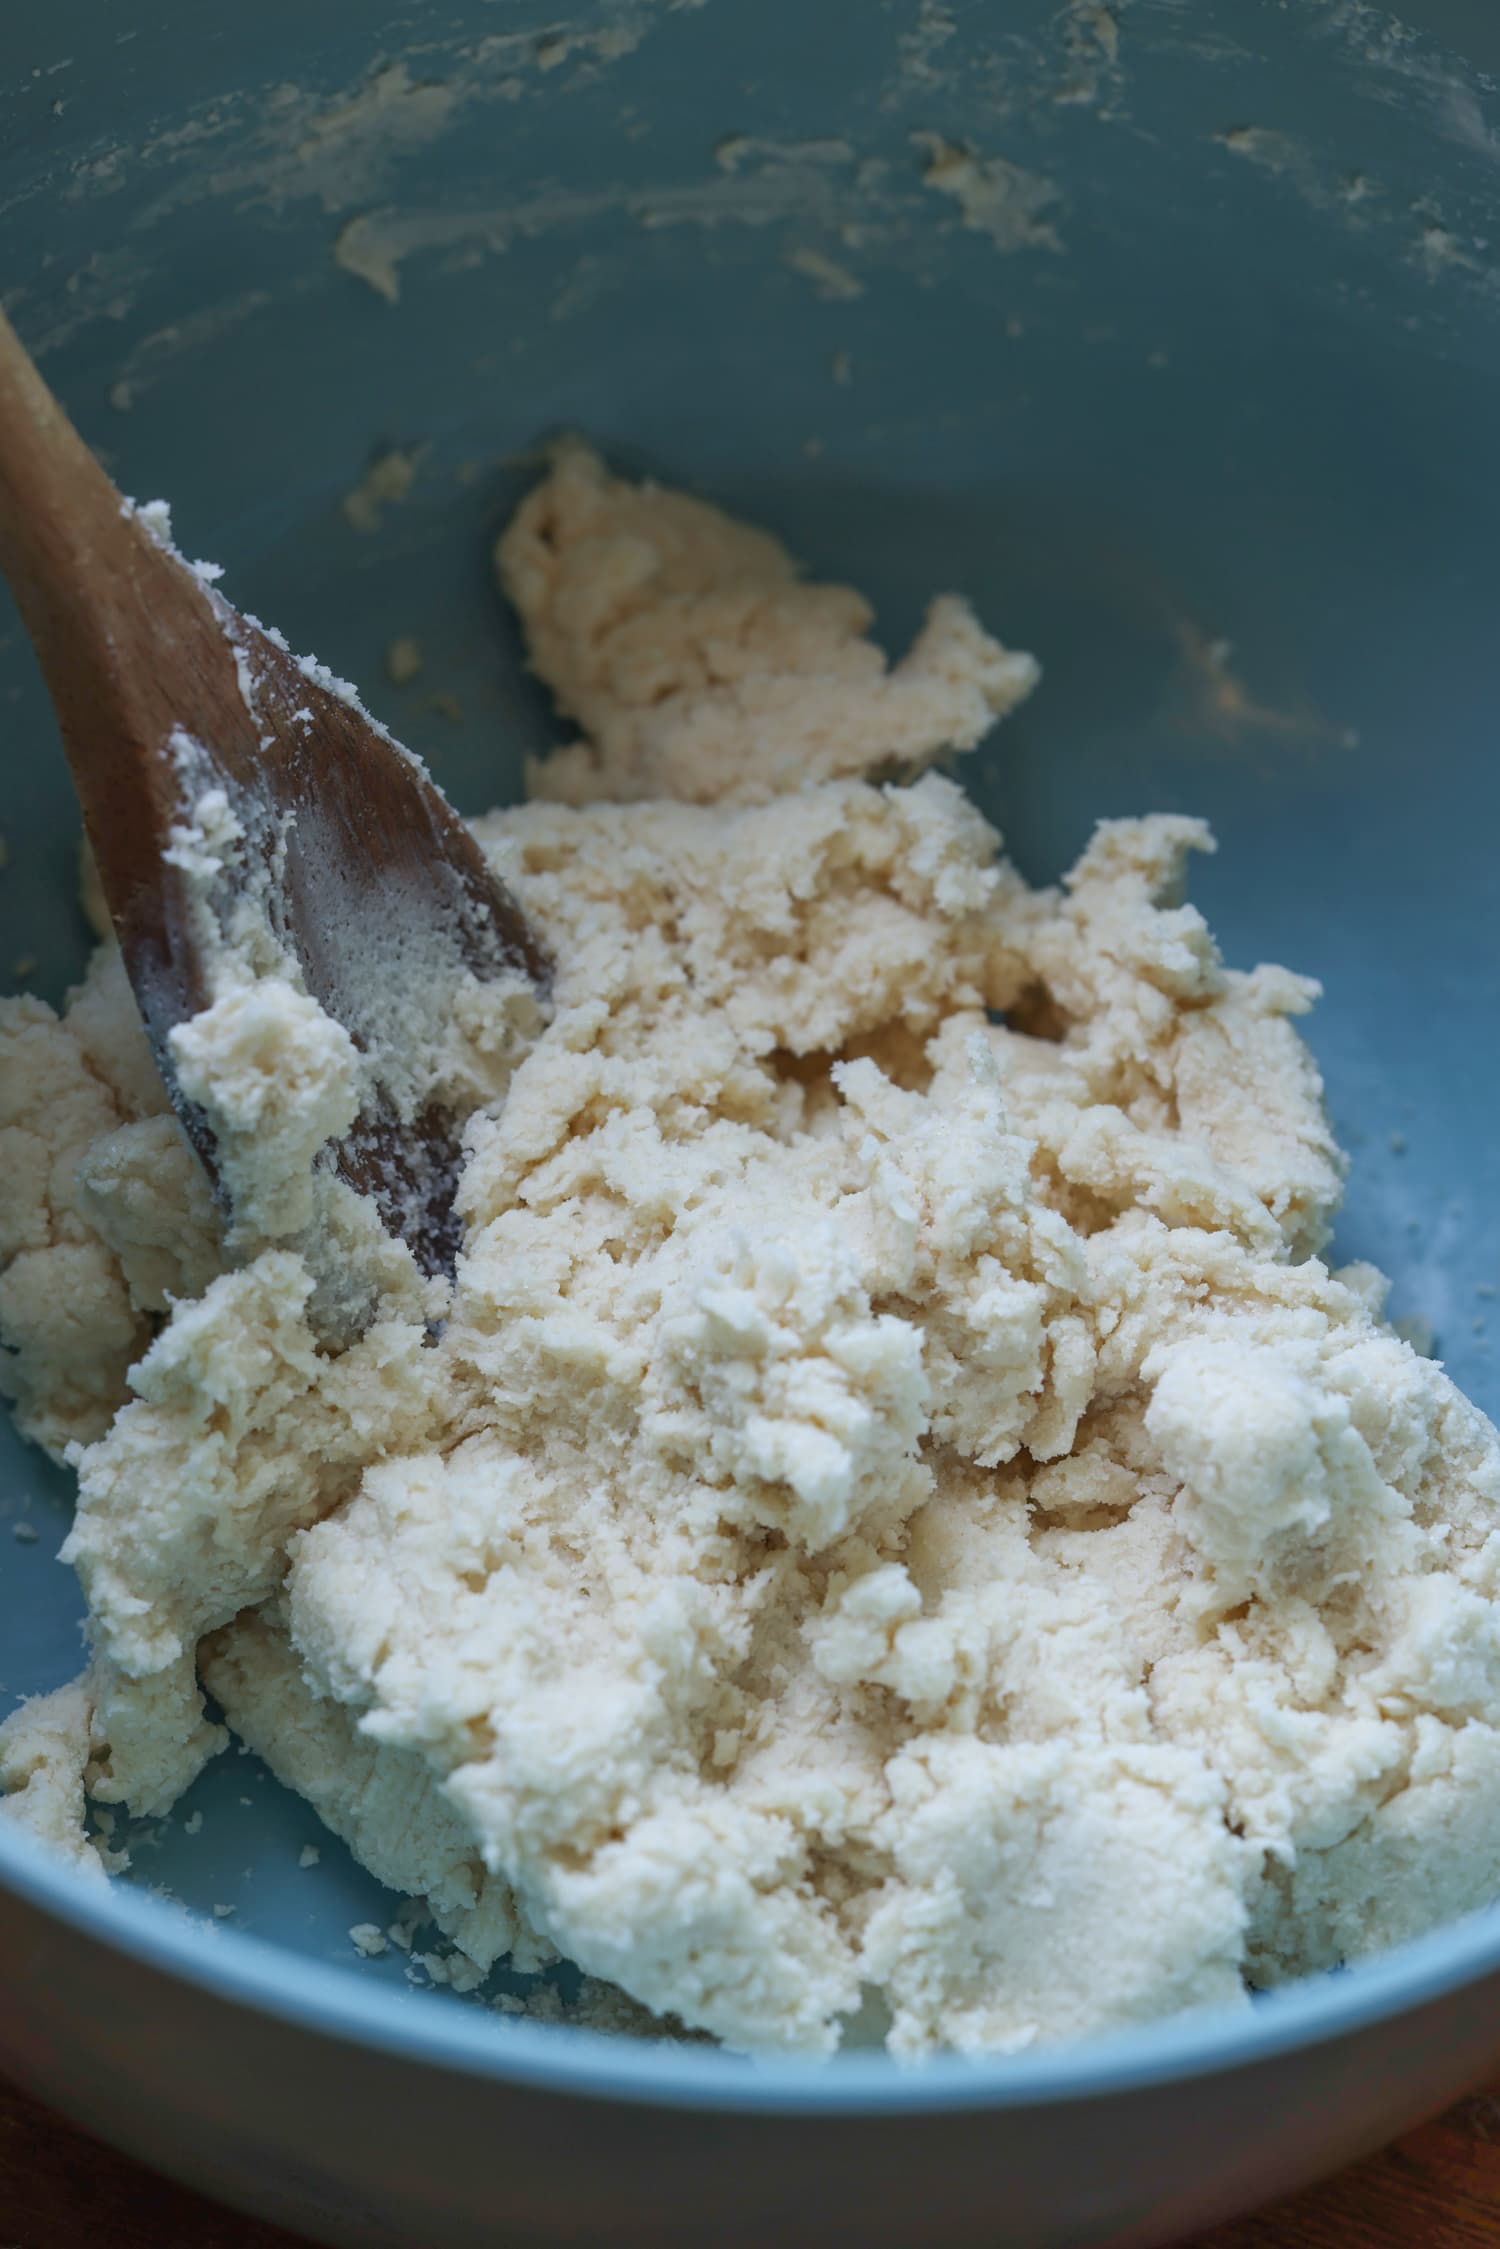 biscuit dough in a blue bowl with a wooden spoon